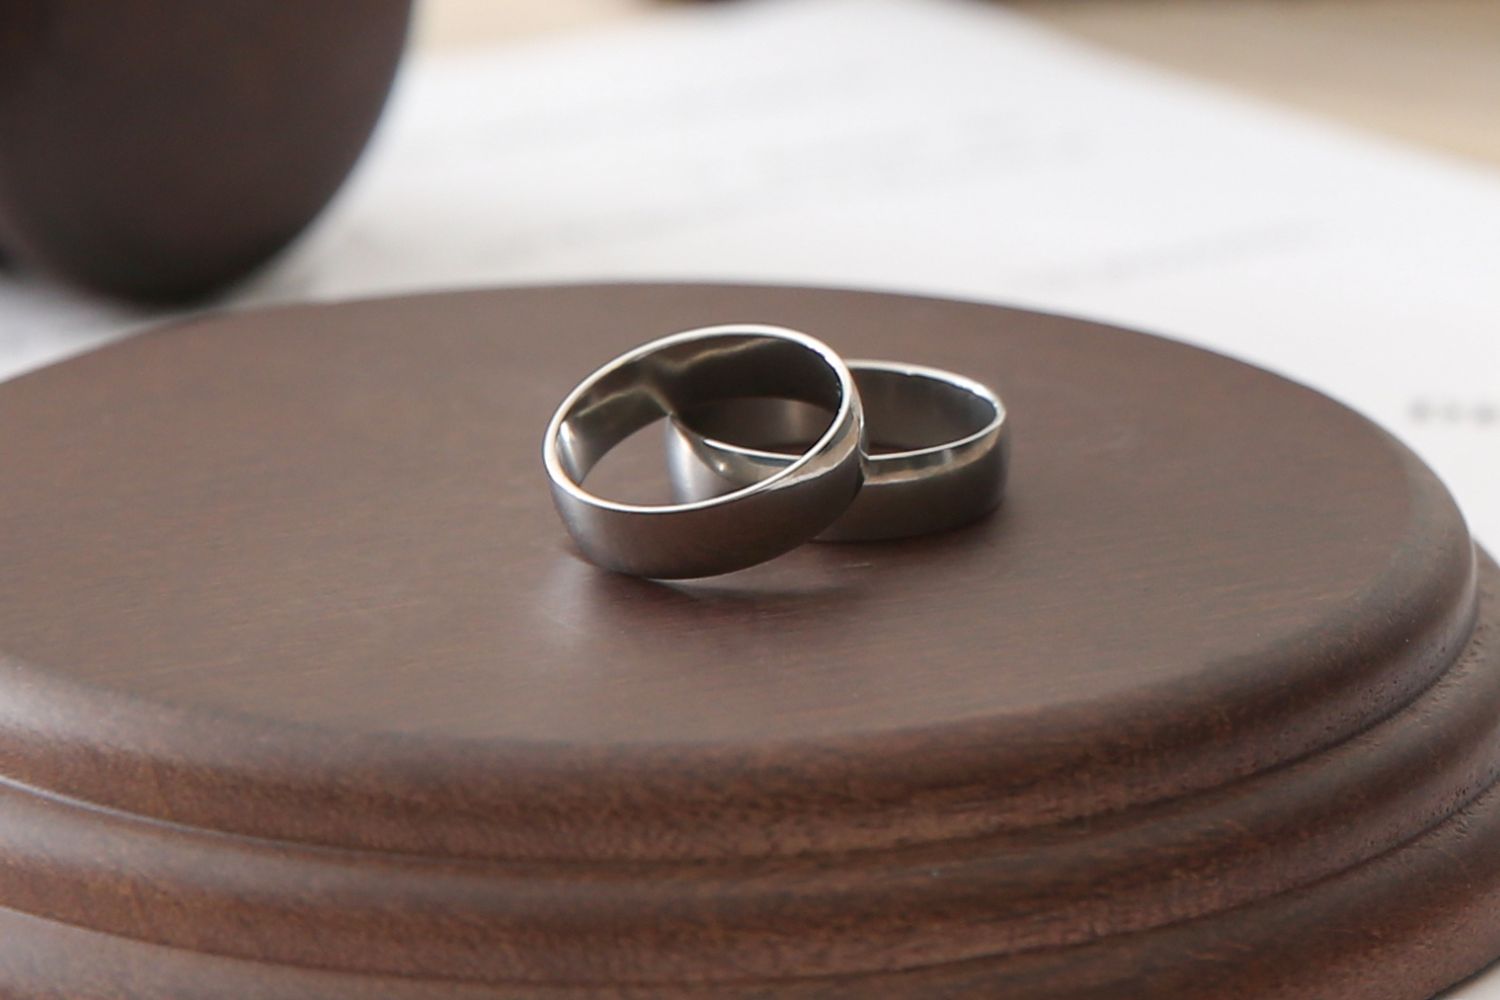 Two Tungsten Rings on a wooden table